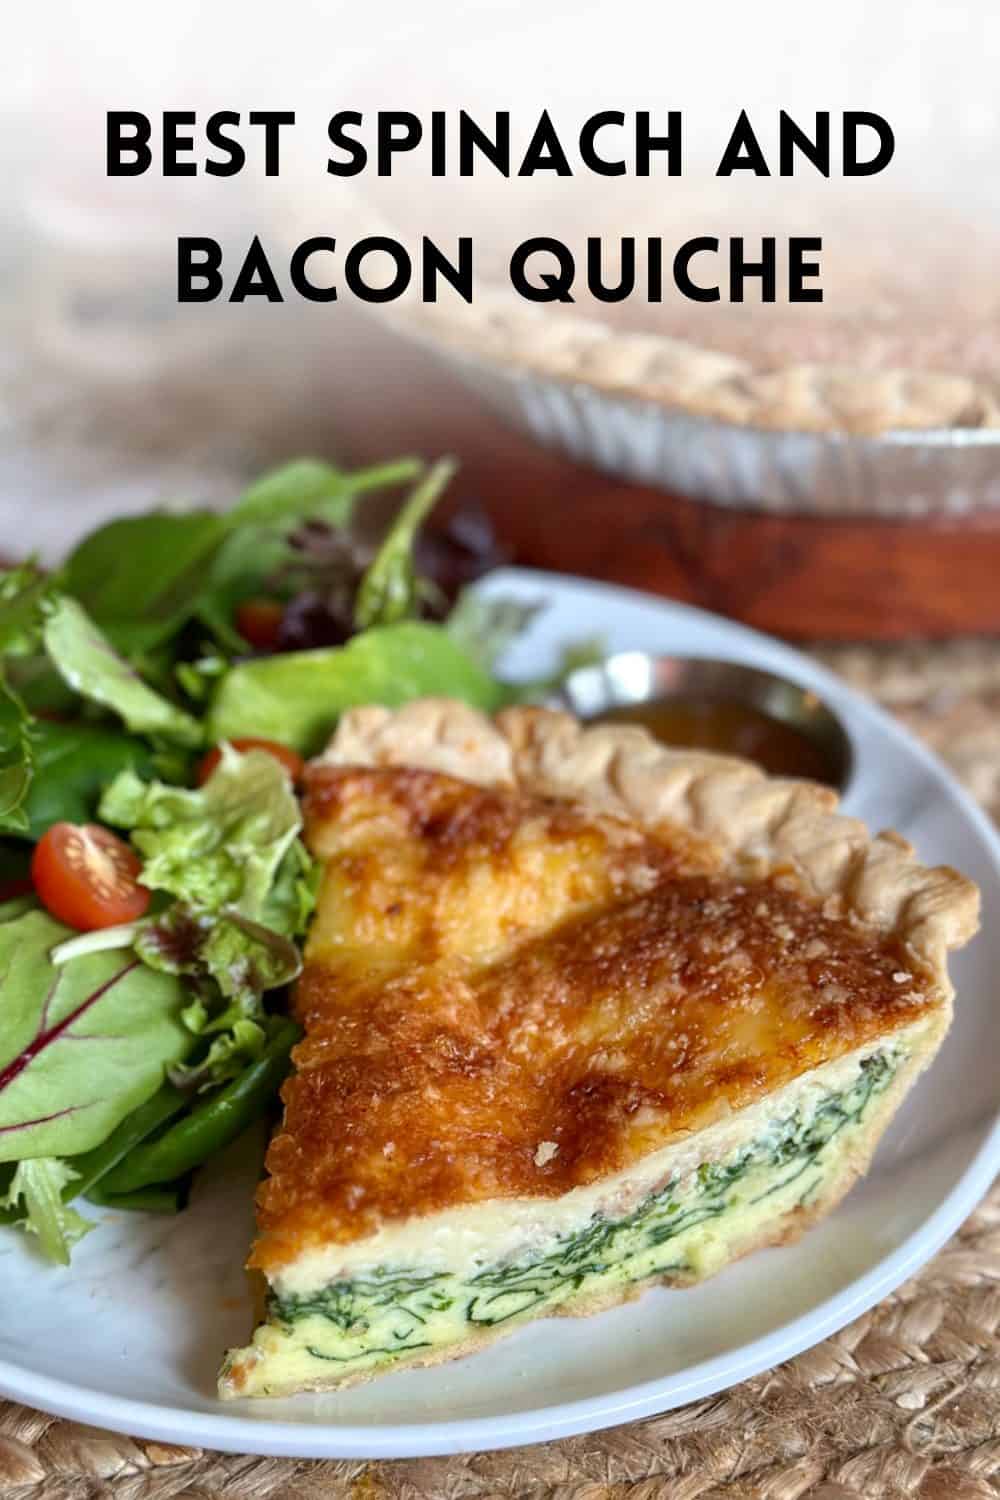 Best Spinach and Bacon Quiche - Dinner in 321